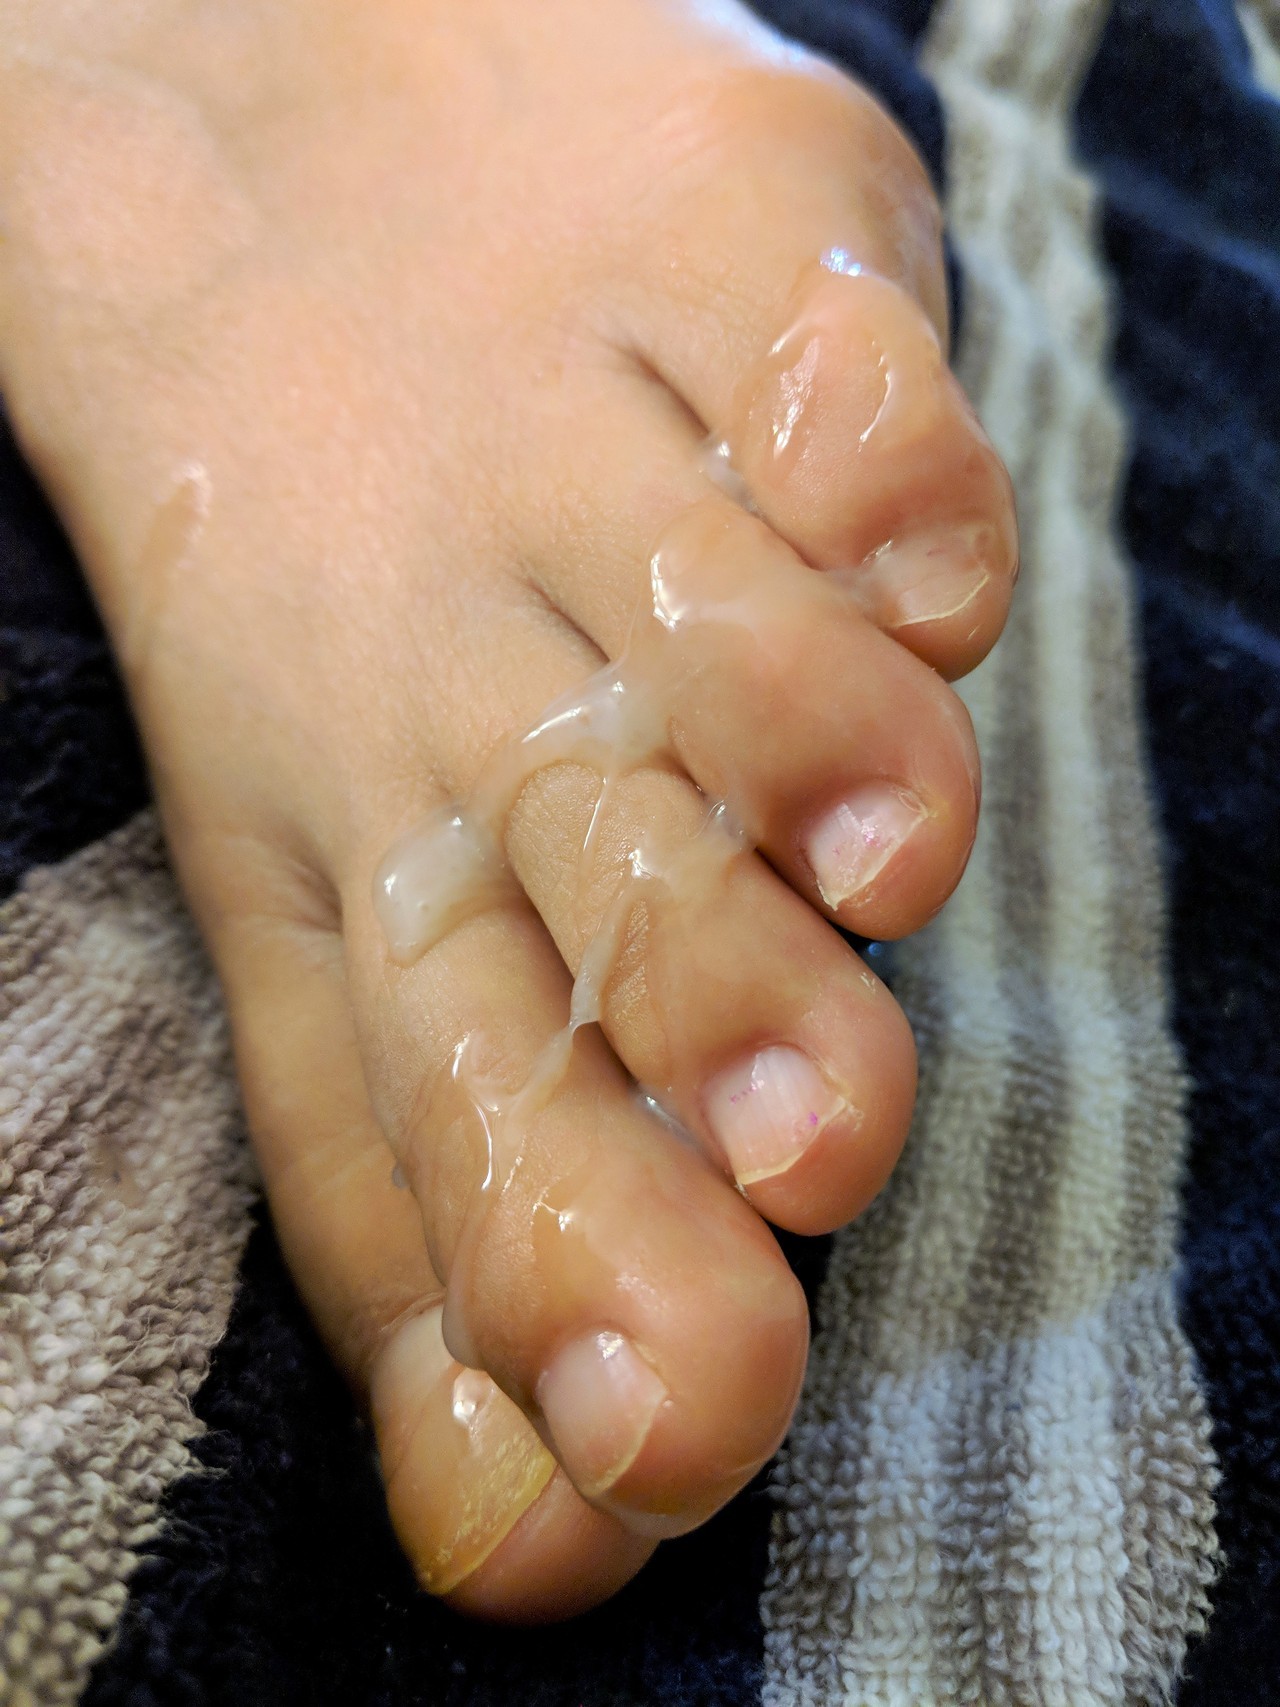 blackrussian007:  So should I call this “Cum on my toes Tuesday”? Or should